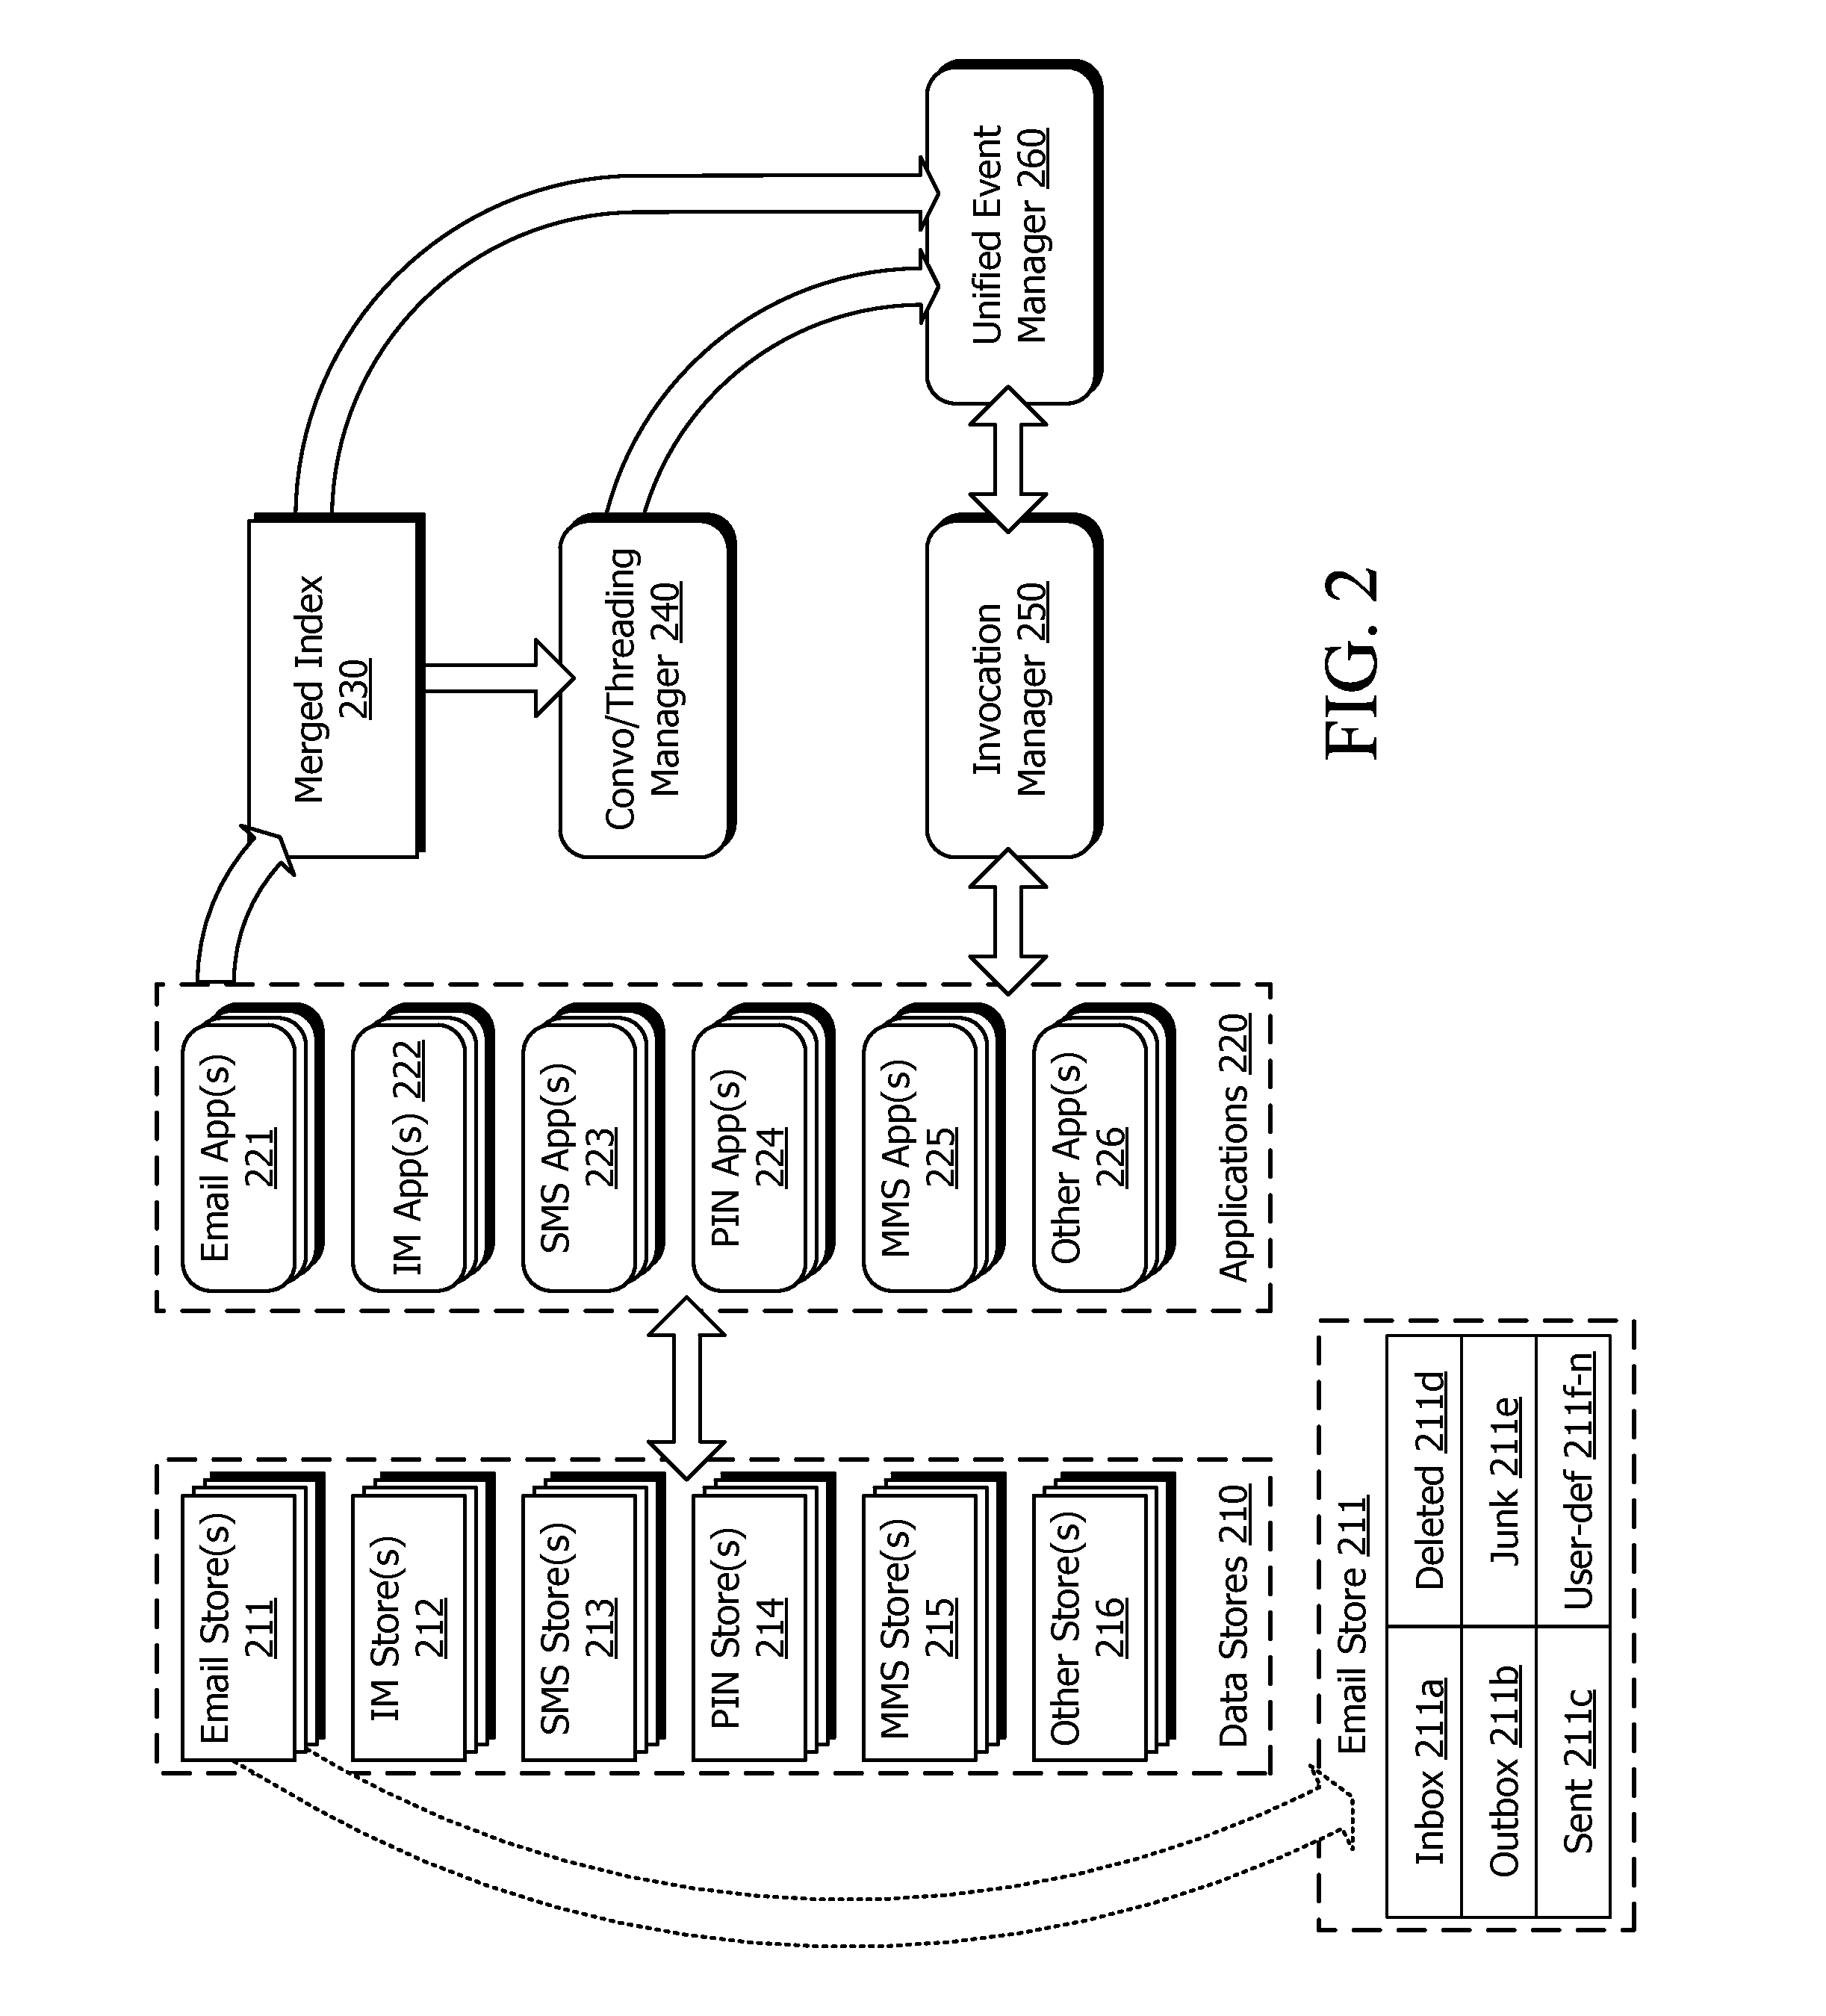 System, method and device-readable medium for communication event interaction within a unified event view